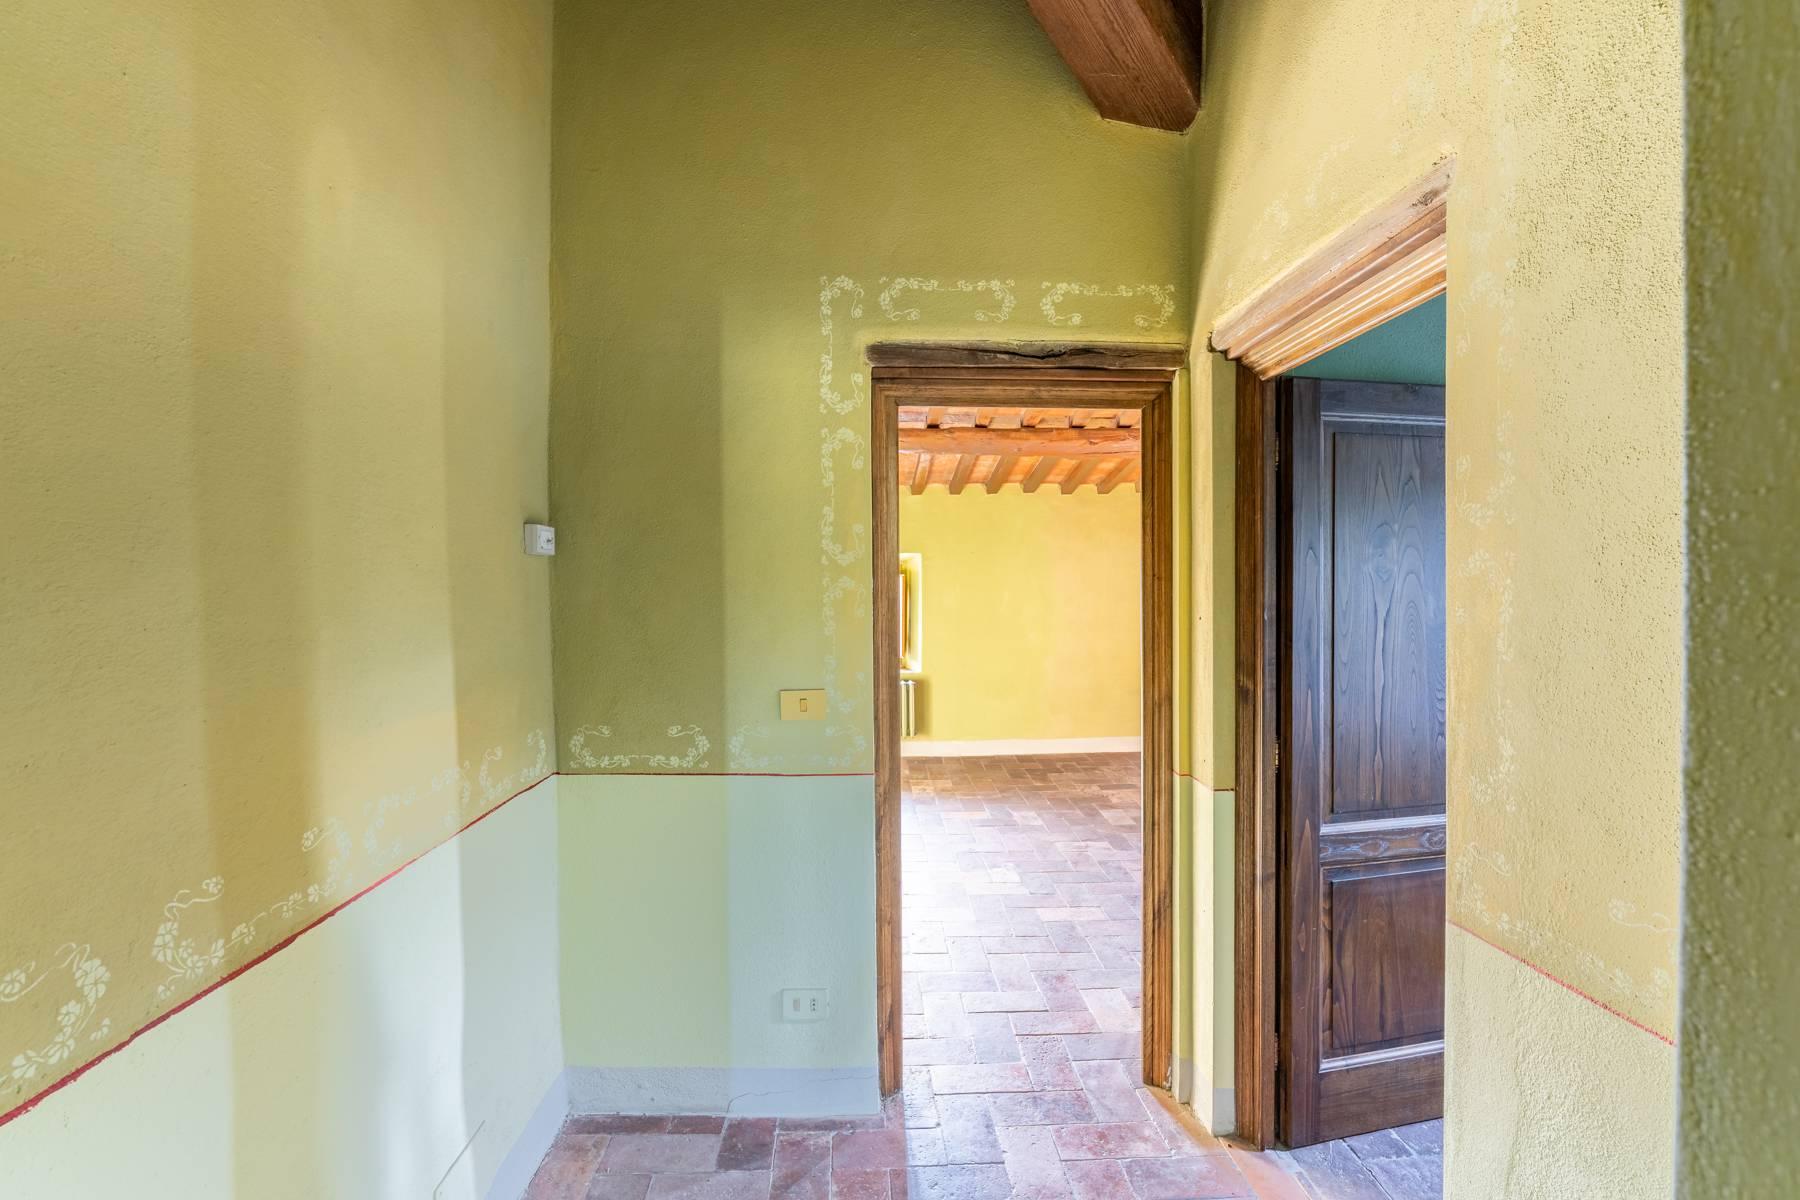 Superb villa with breathtaking views of the Lucca countryside - 23